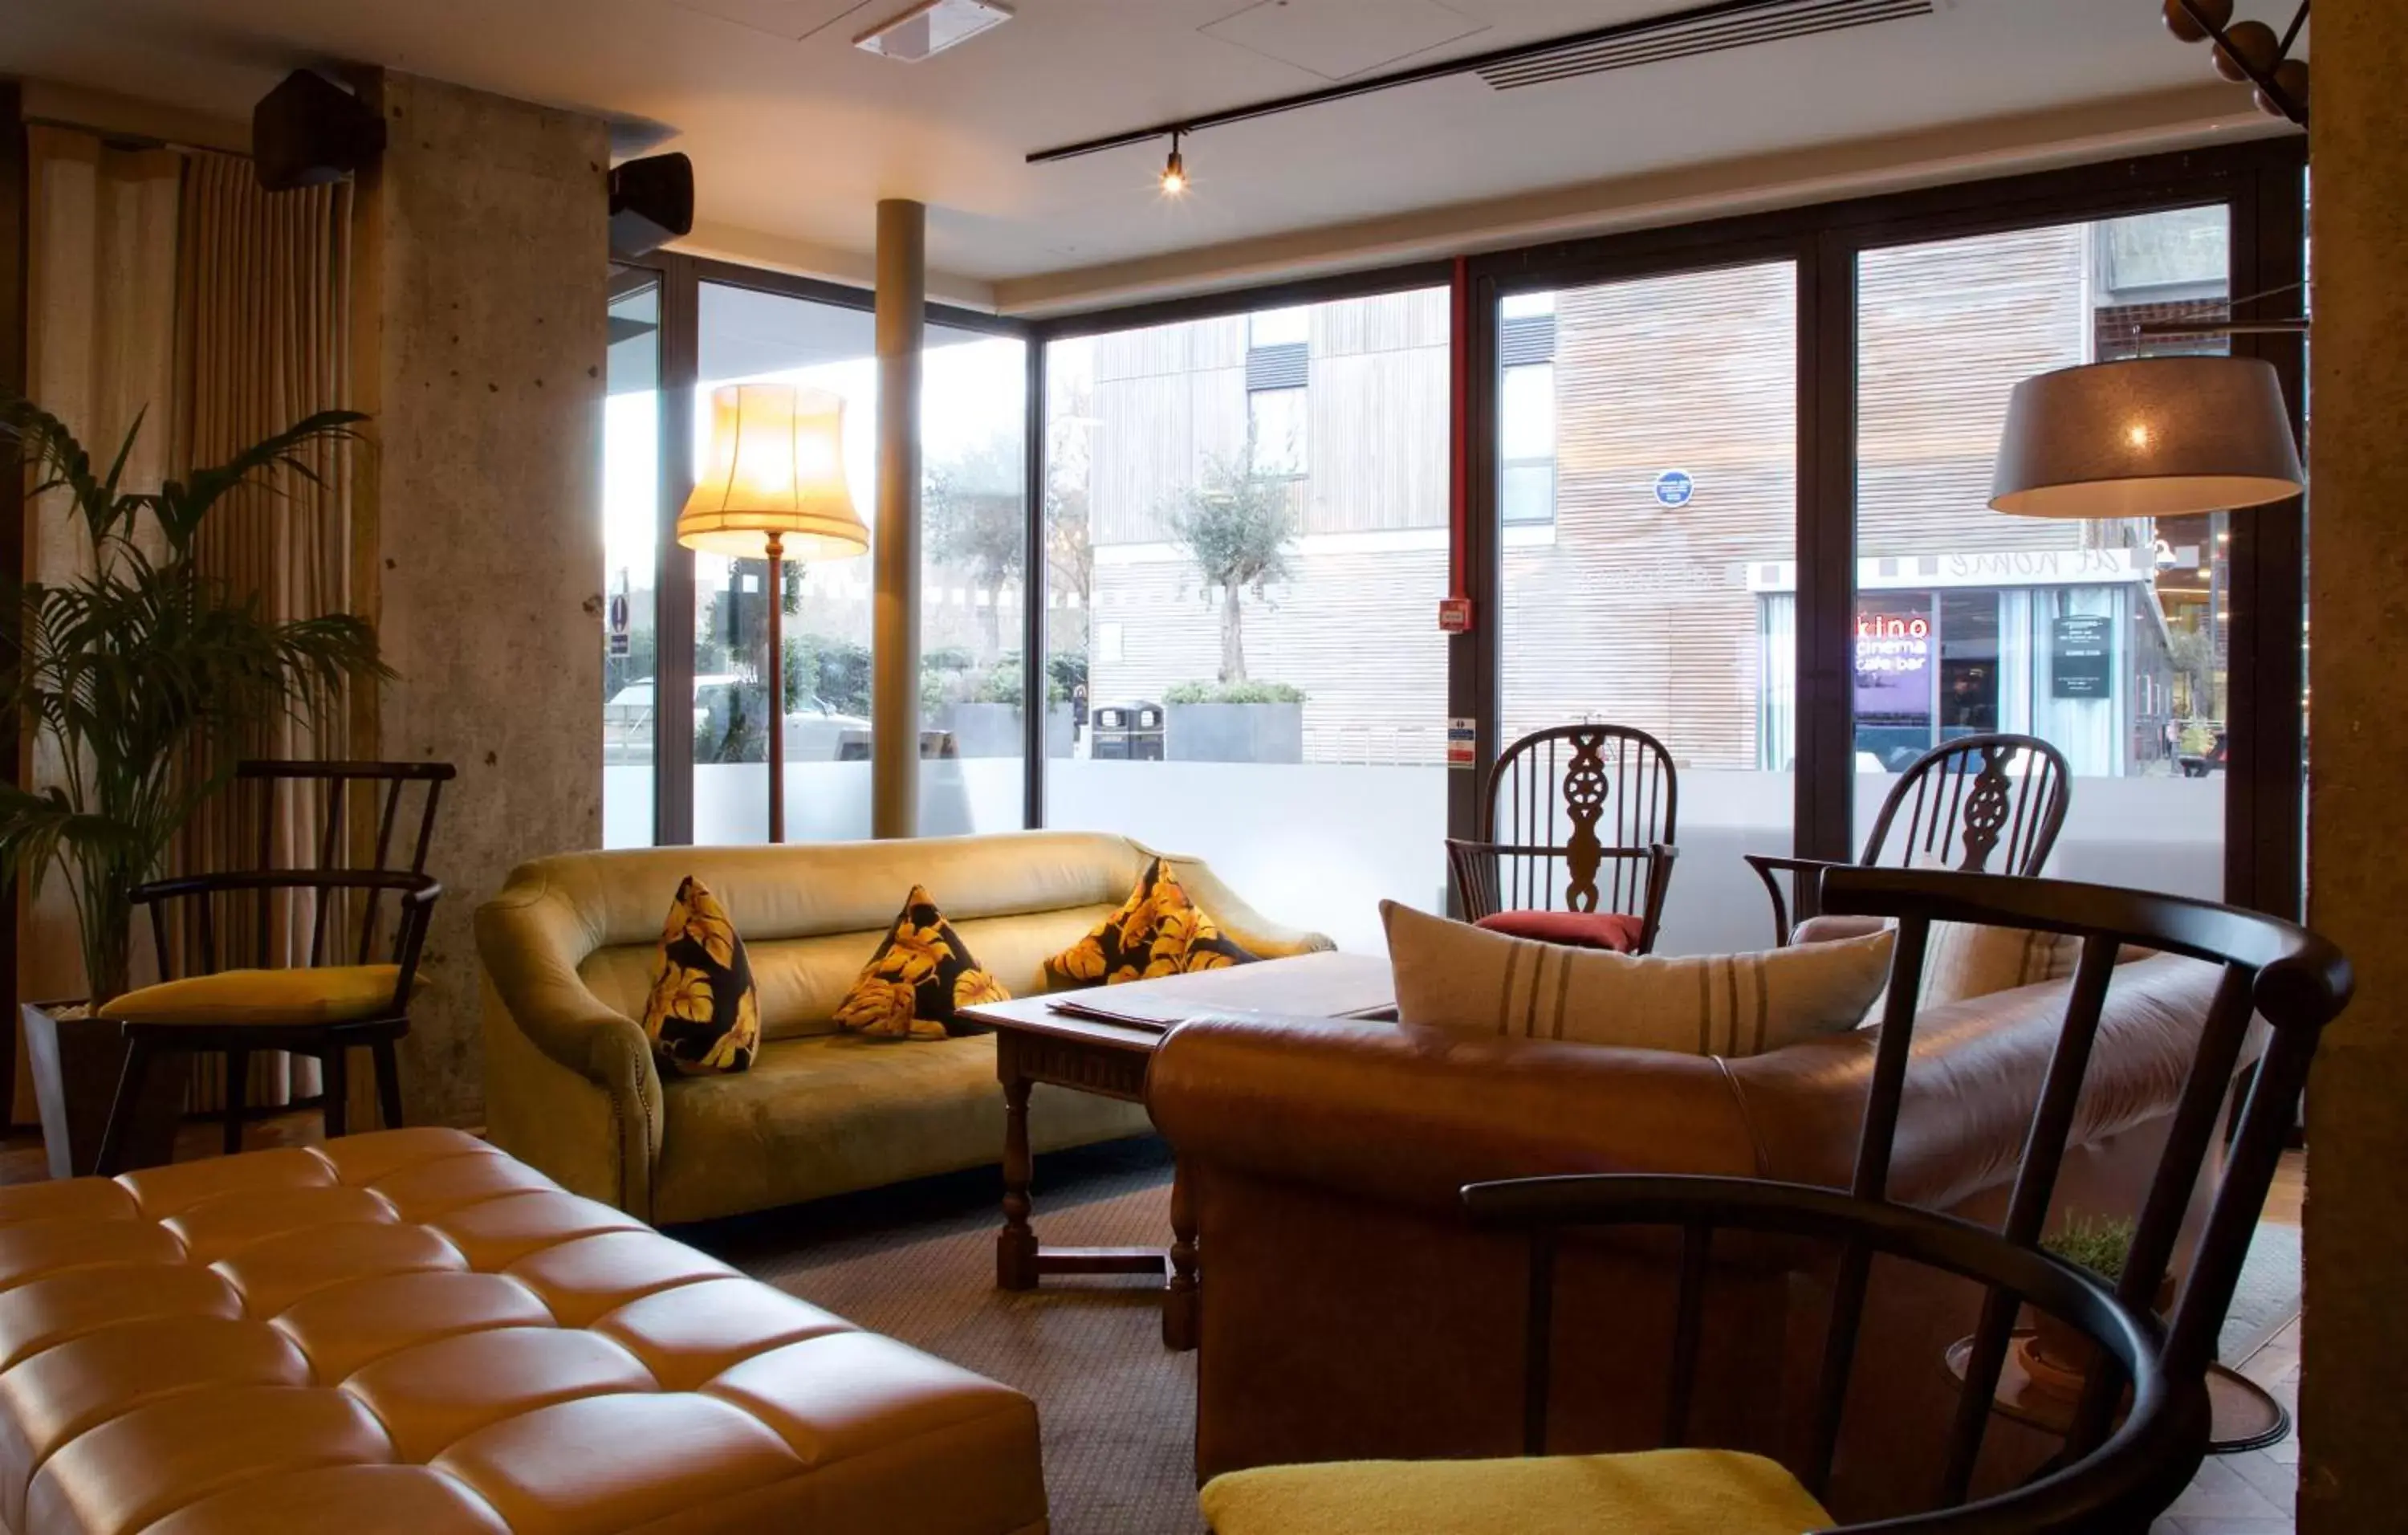 Seating Area in Bermondsey Square Hotel - A Bespoke Hotel